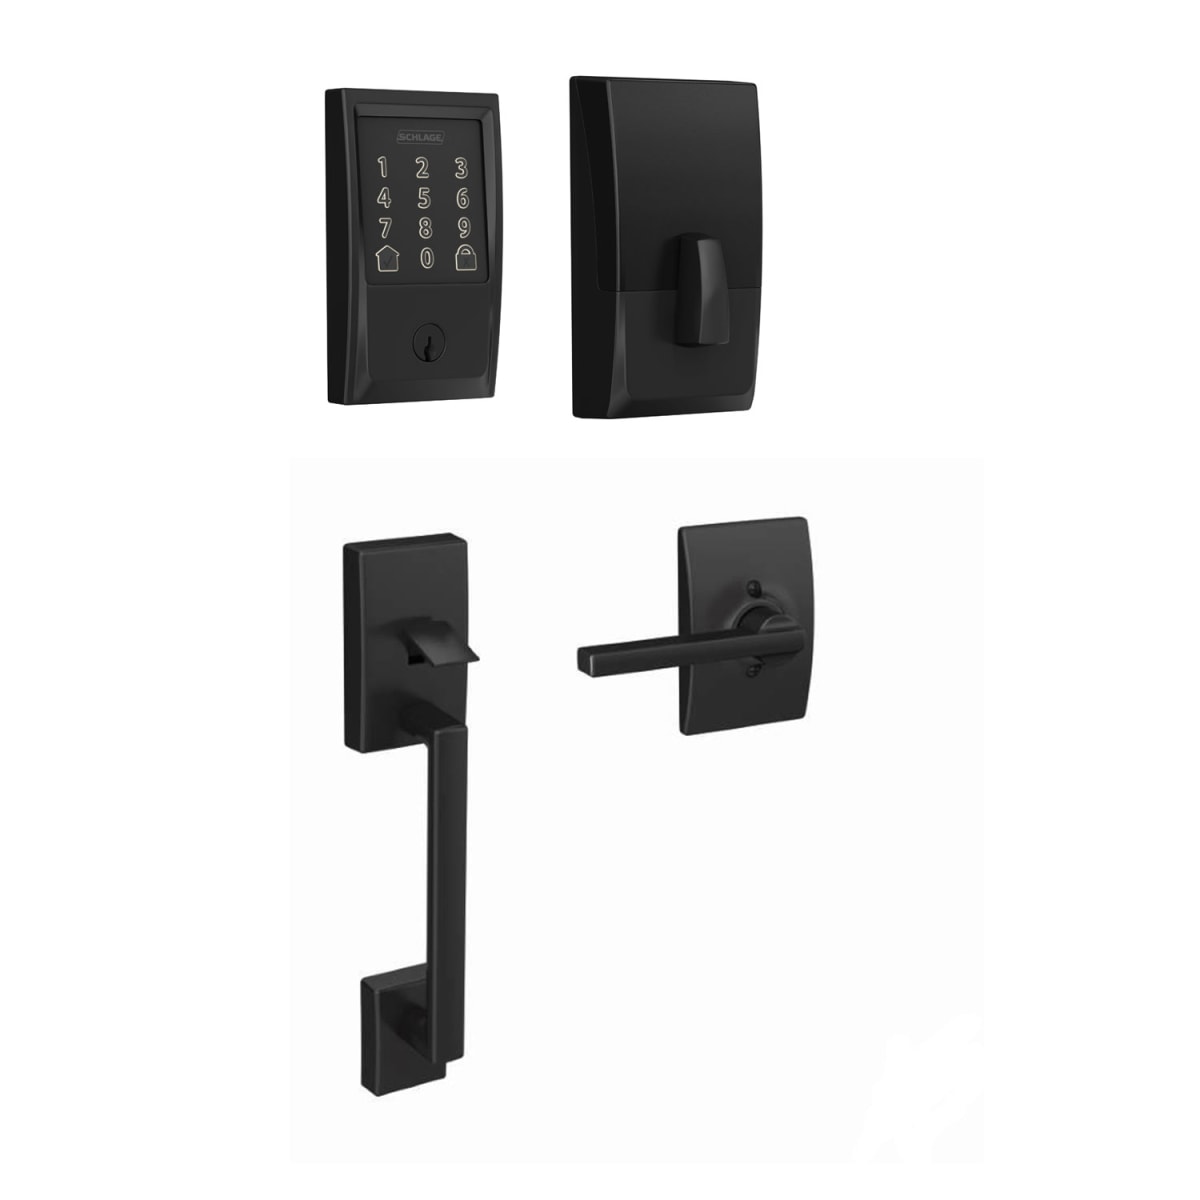 Schlage FBE489WBCEN622LATCEN Matte Black Encode WiFi Enabled Electronic  Keypad Deadbolt with Century Entry Handleset and Latitude Lever 